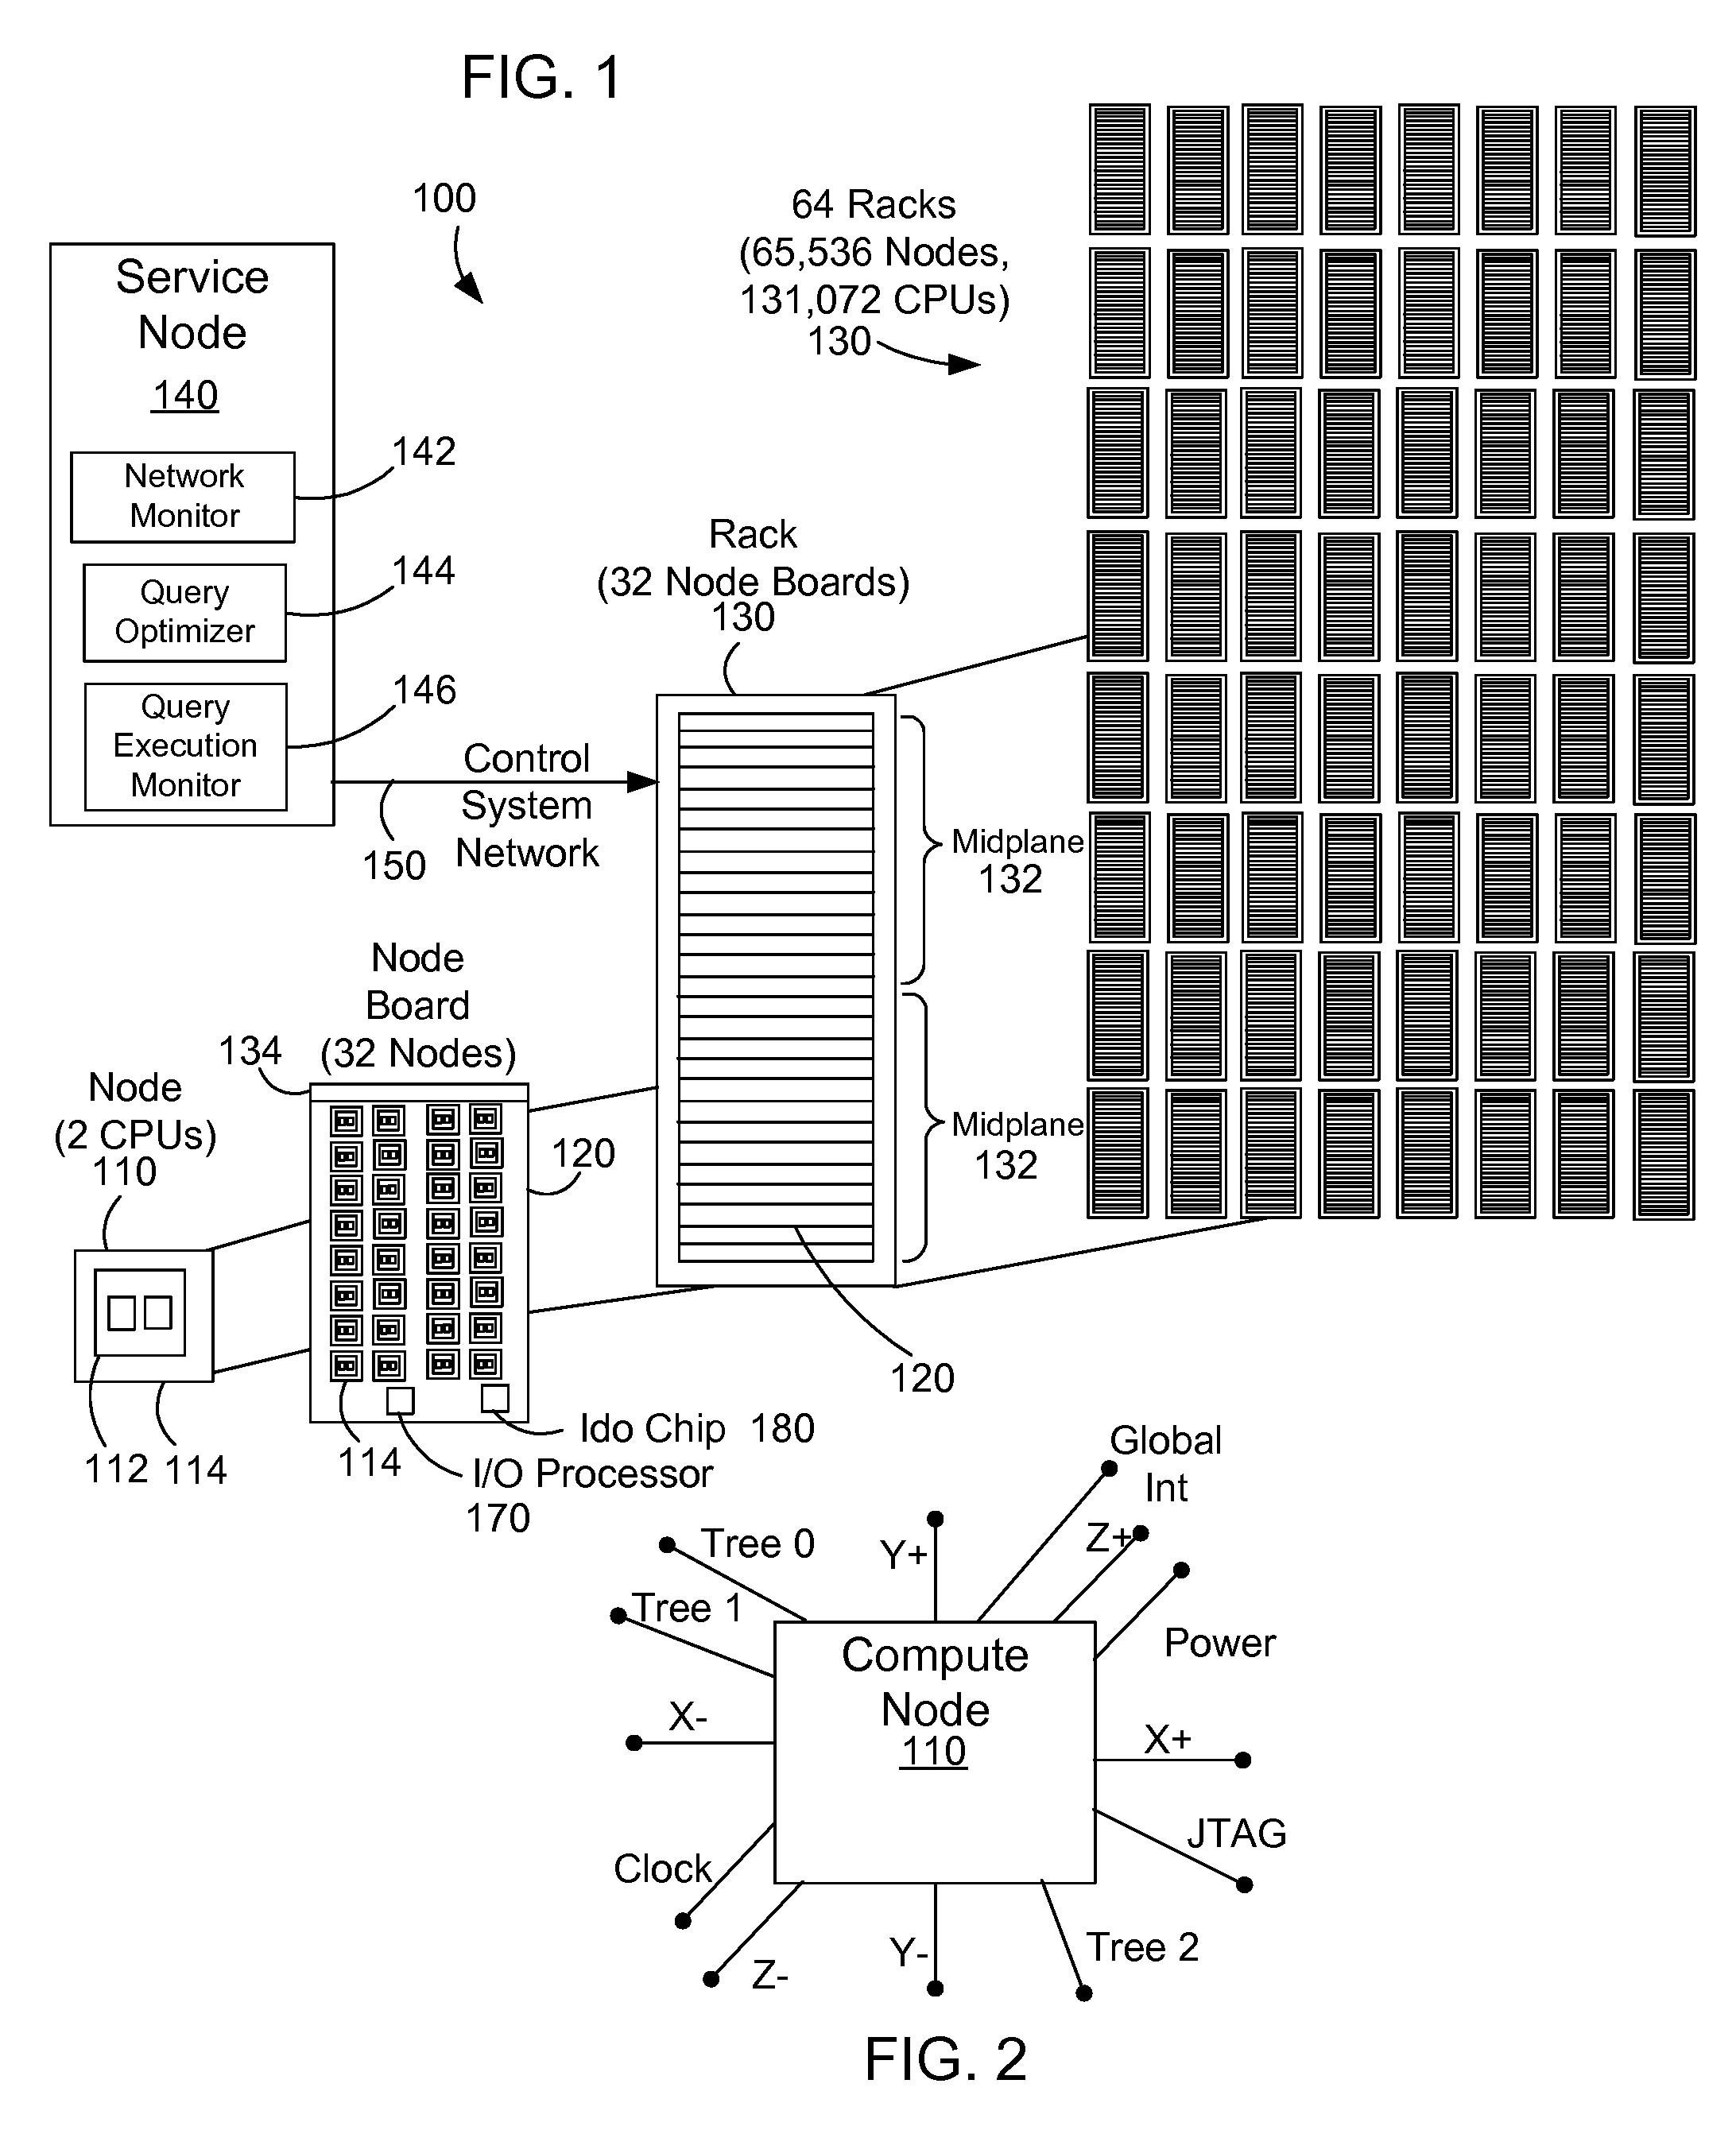 Query Execution and Optimization with Autonomic Error Recovery from Network Failures in a Parallel Computer System with Multiple Networks